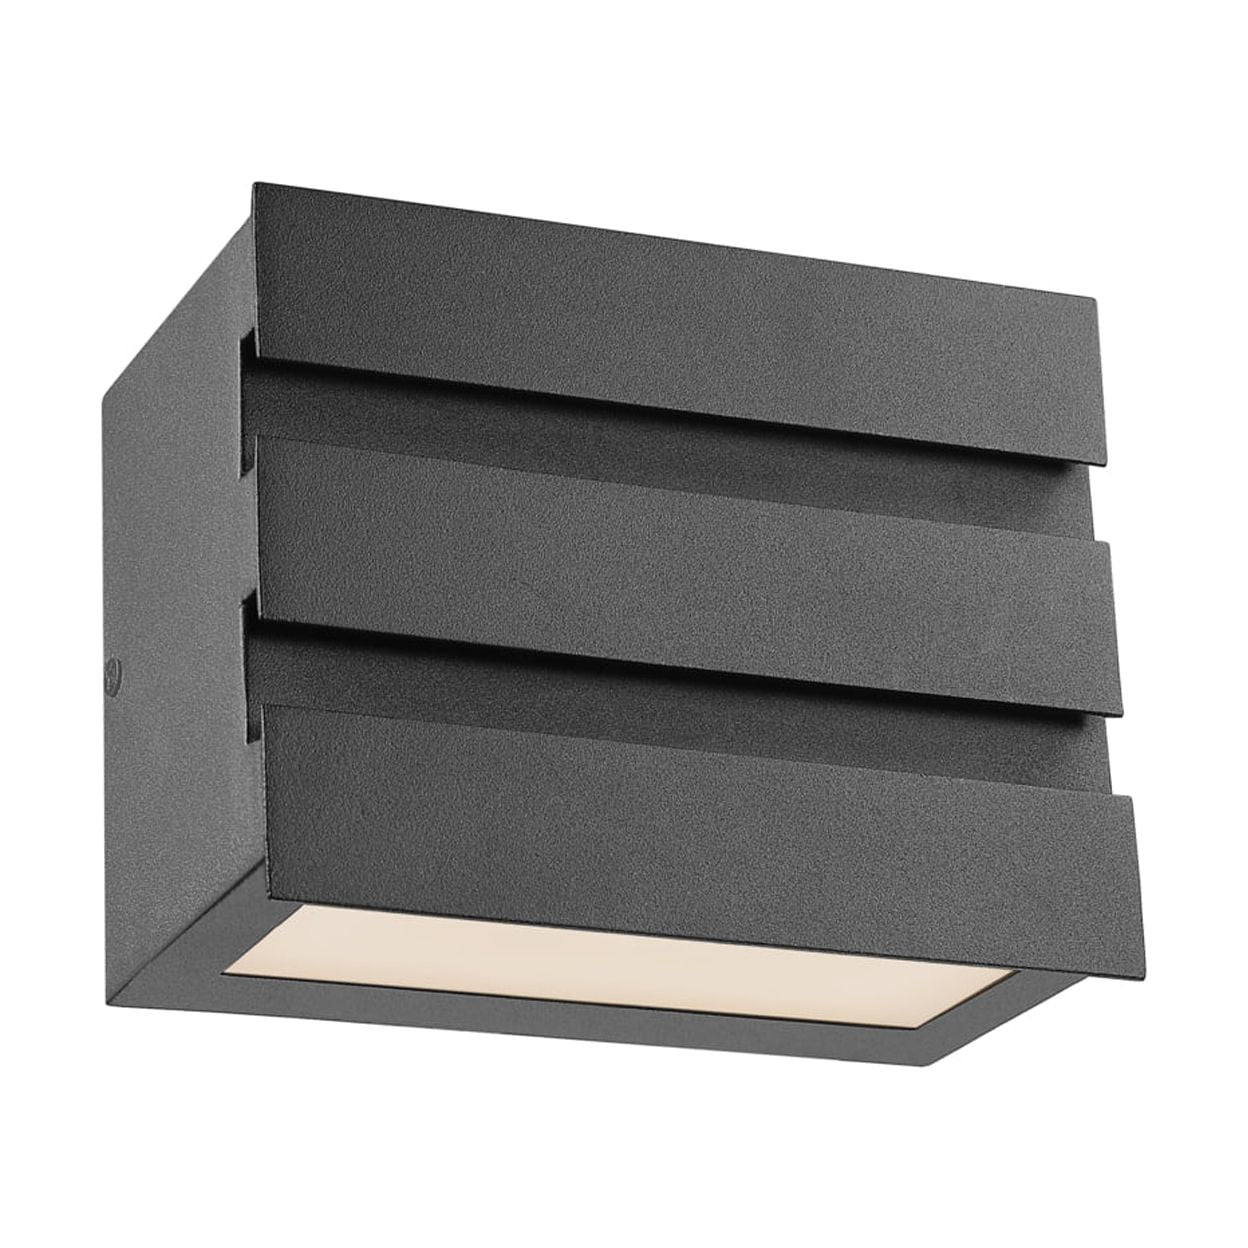 Ch2r903bk05-odl Beckett Contemporary Led Light Textured Black Outdoor Wall Sconce - 5 In.